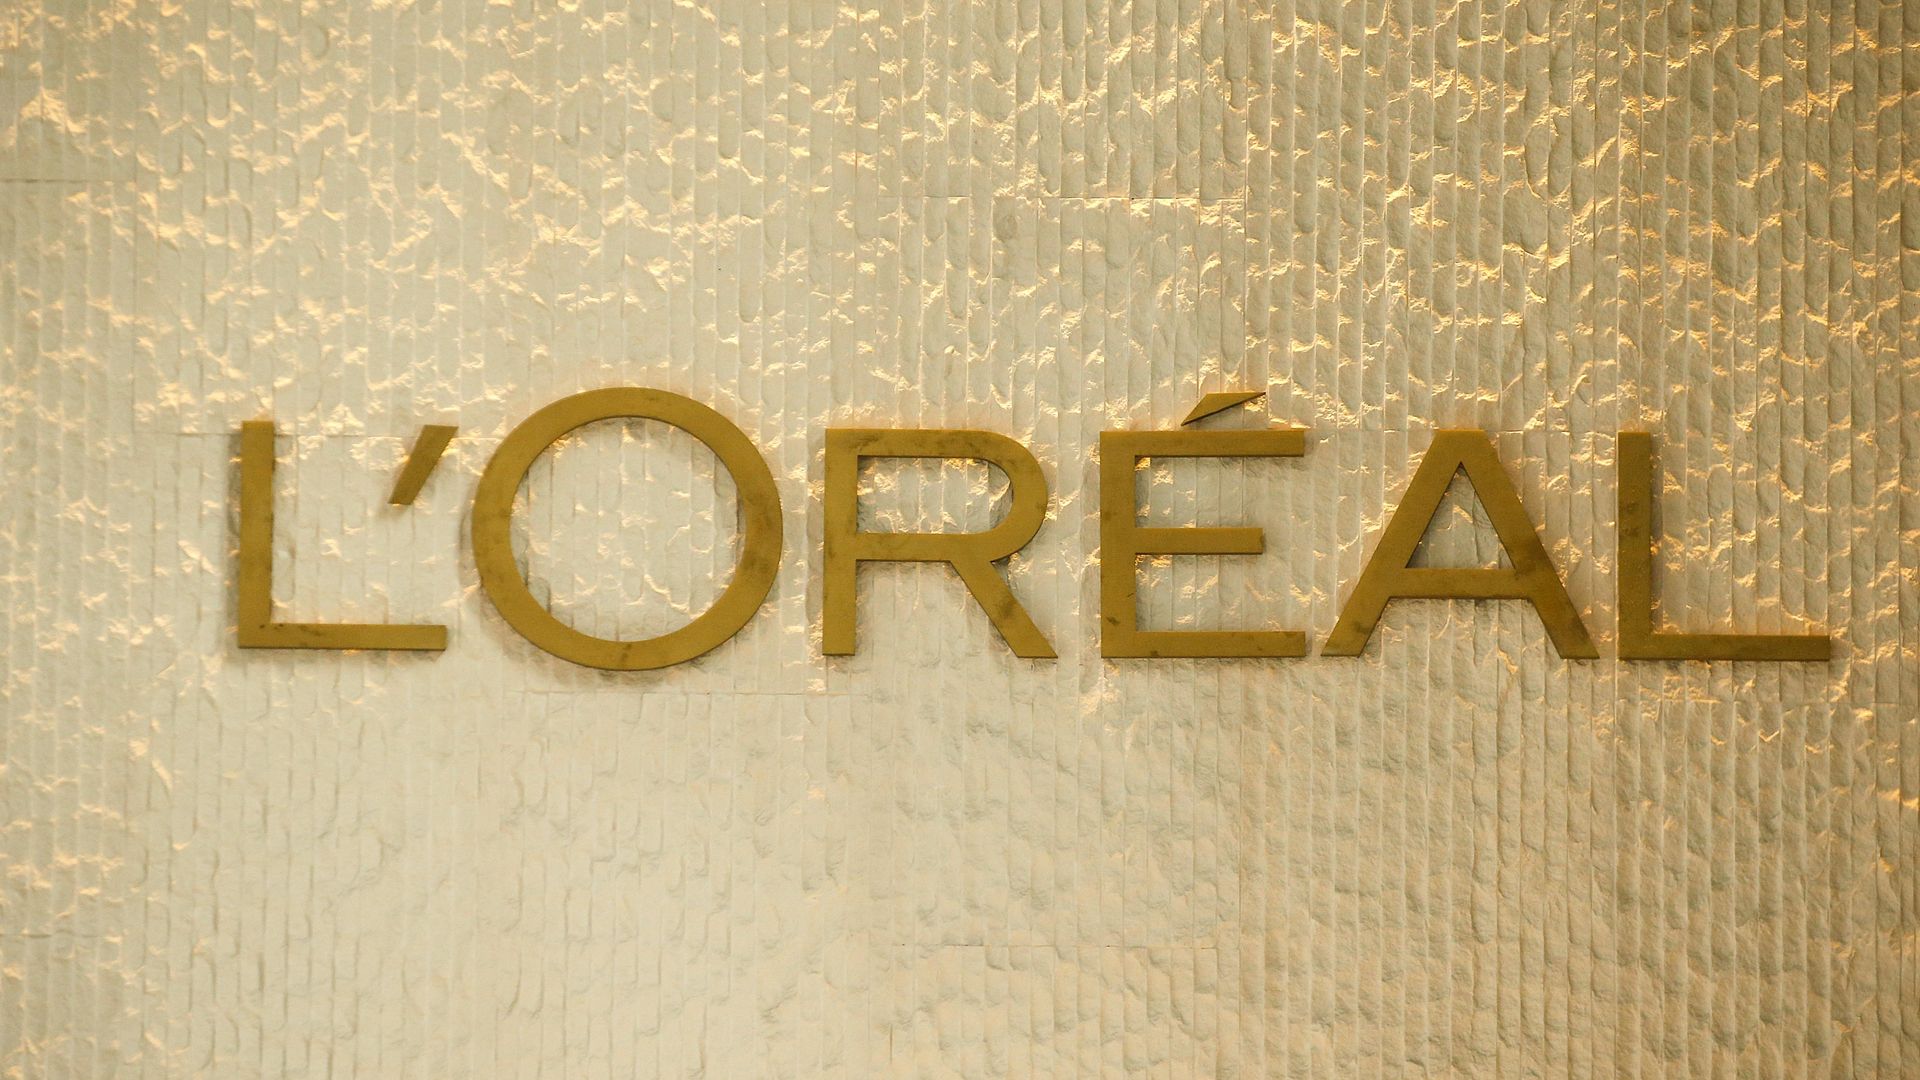 The L'Oreal label in gold on a light gold wall